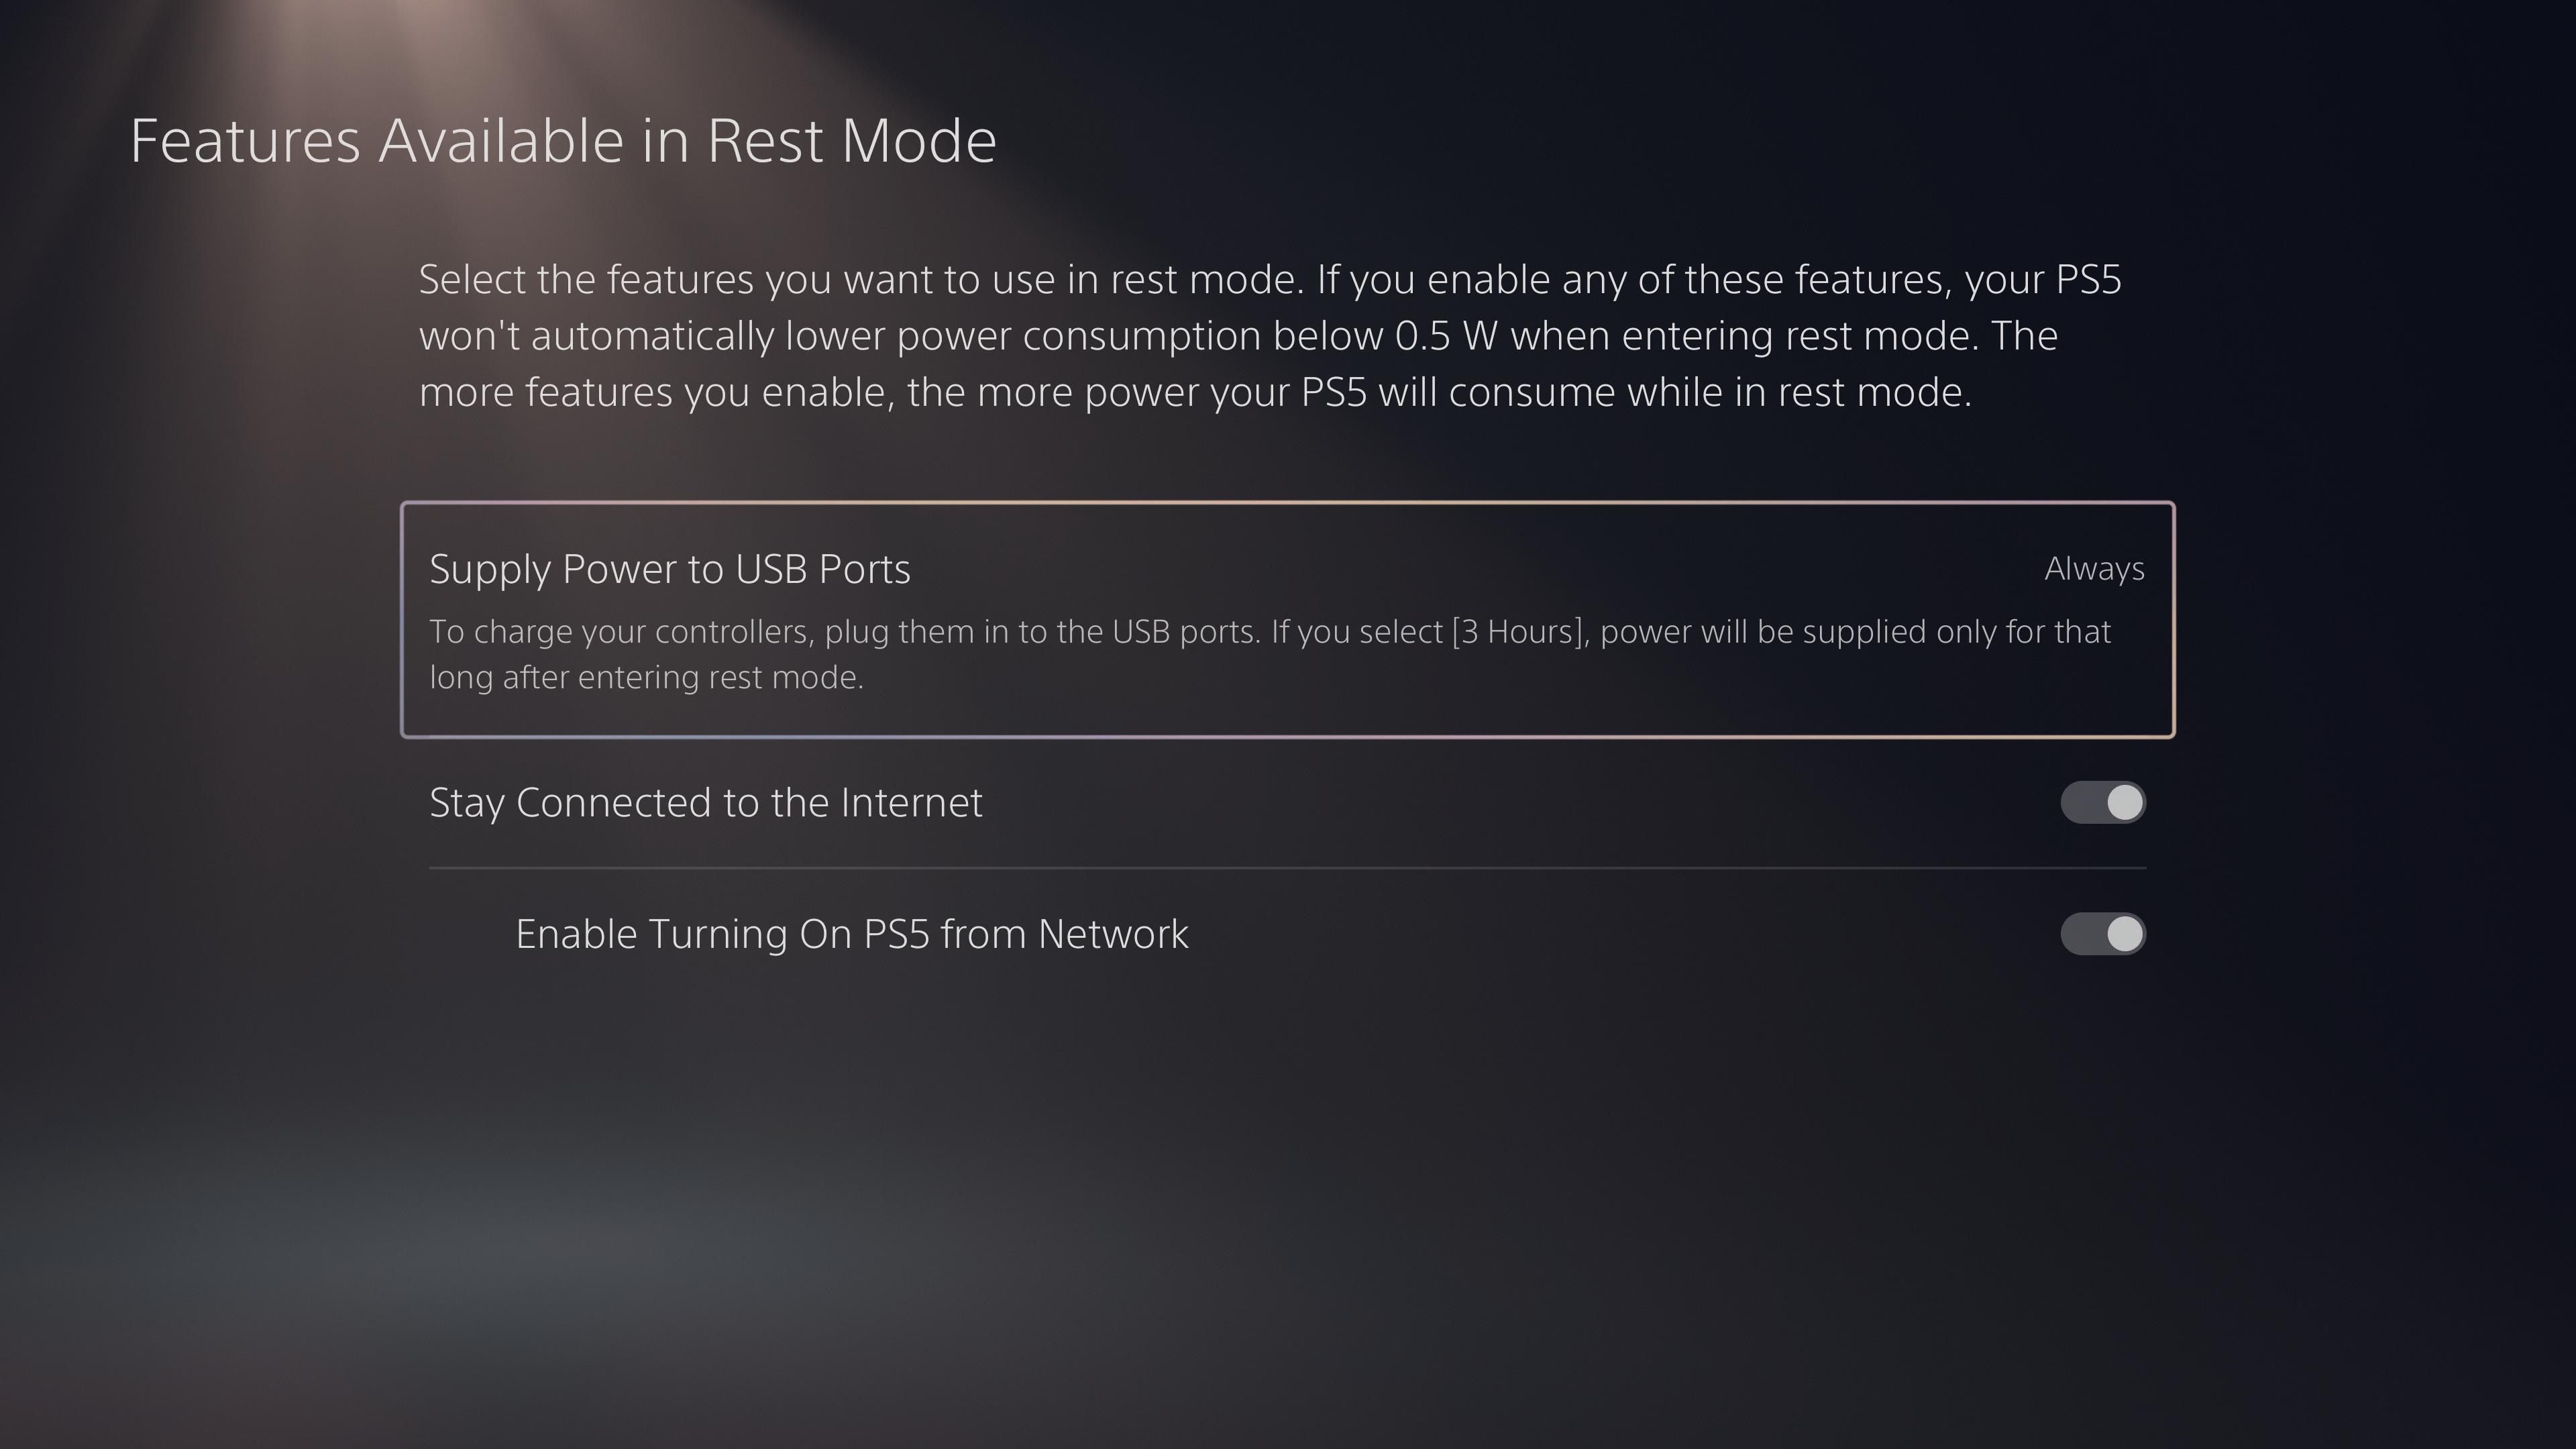 Choose which features are available in rest mode on your PS5.